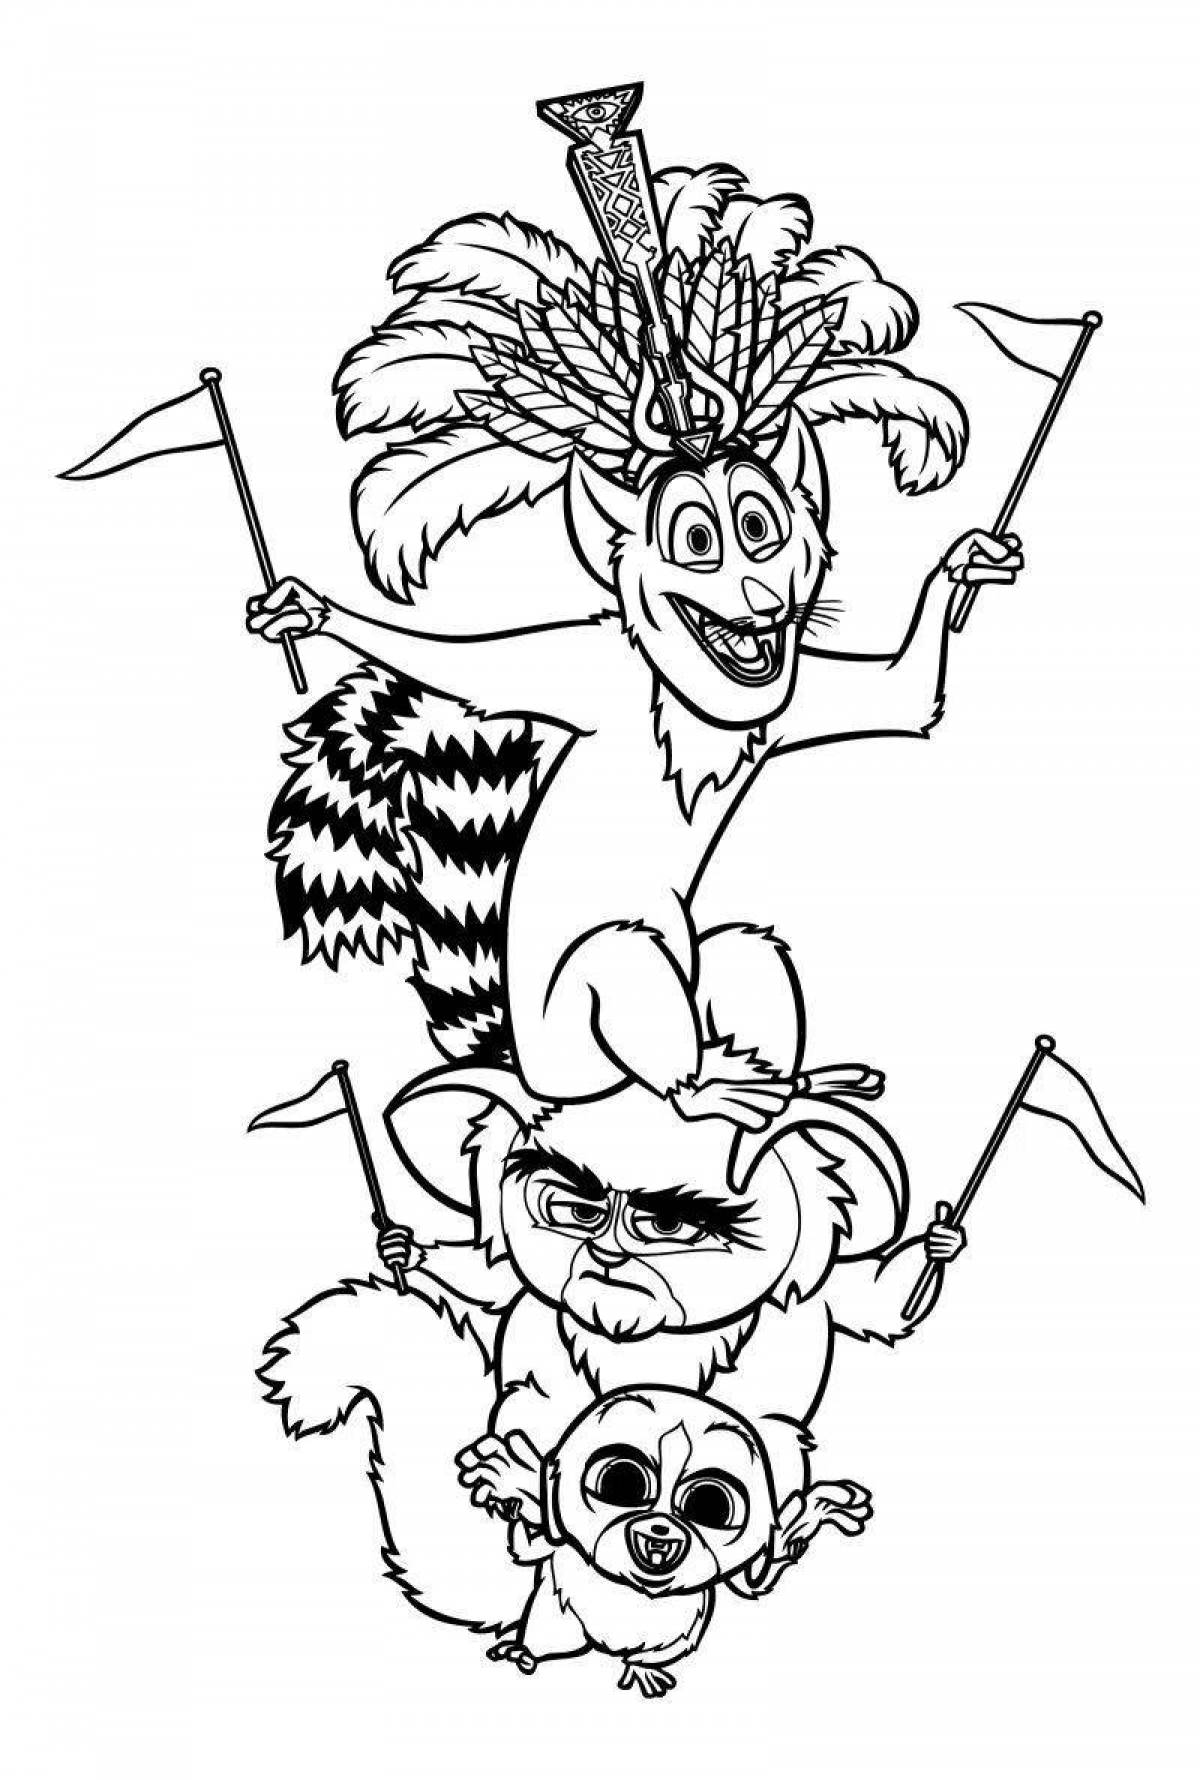 Colorful king julian coloring page